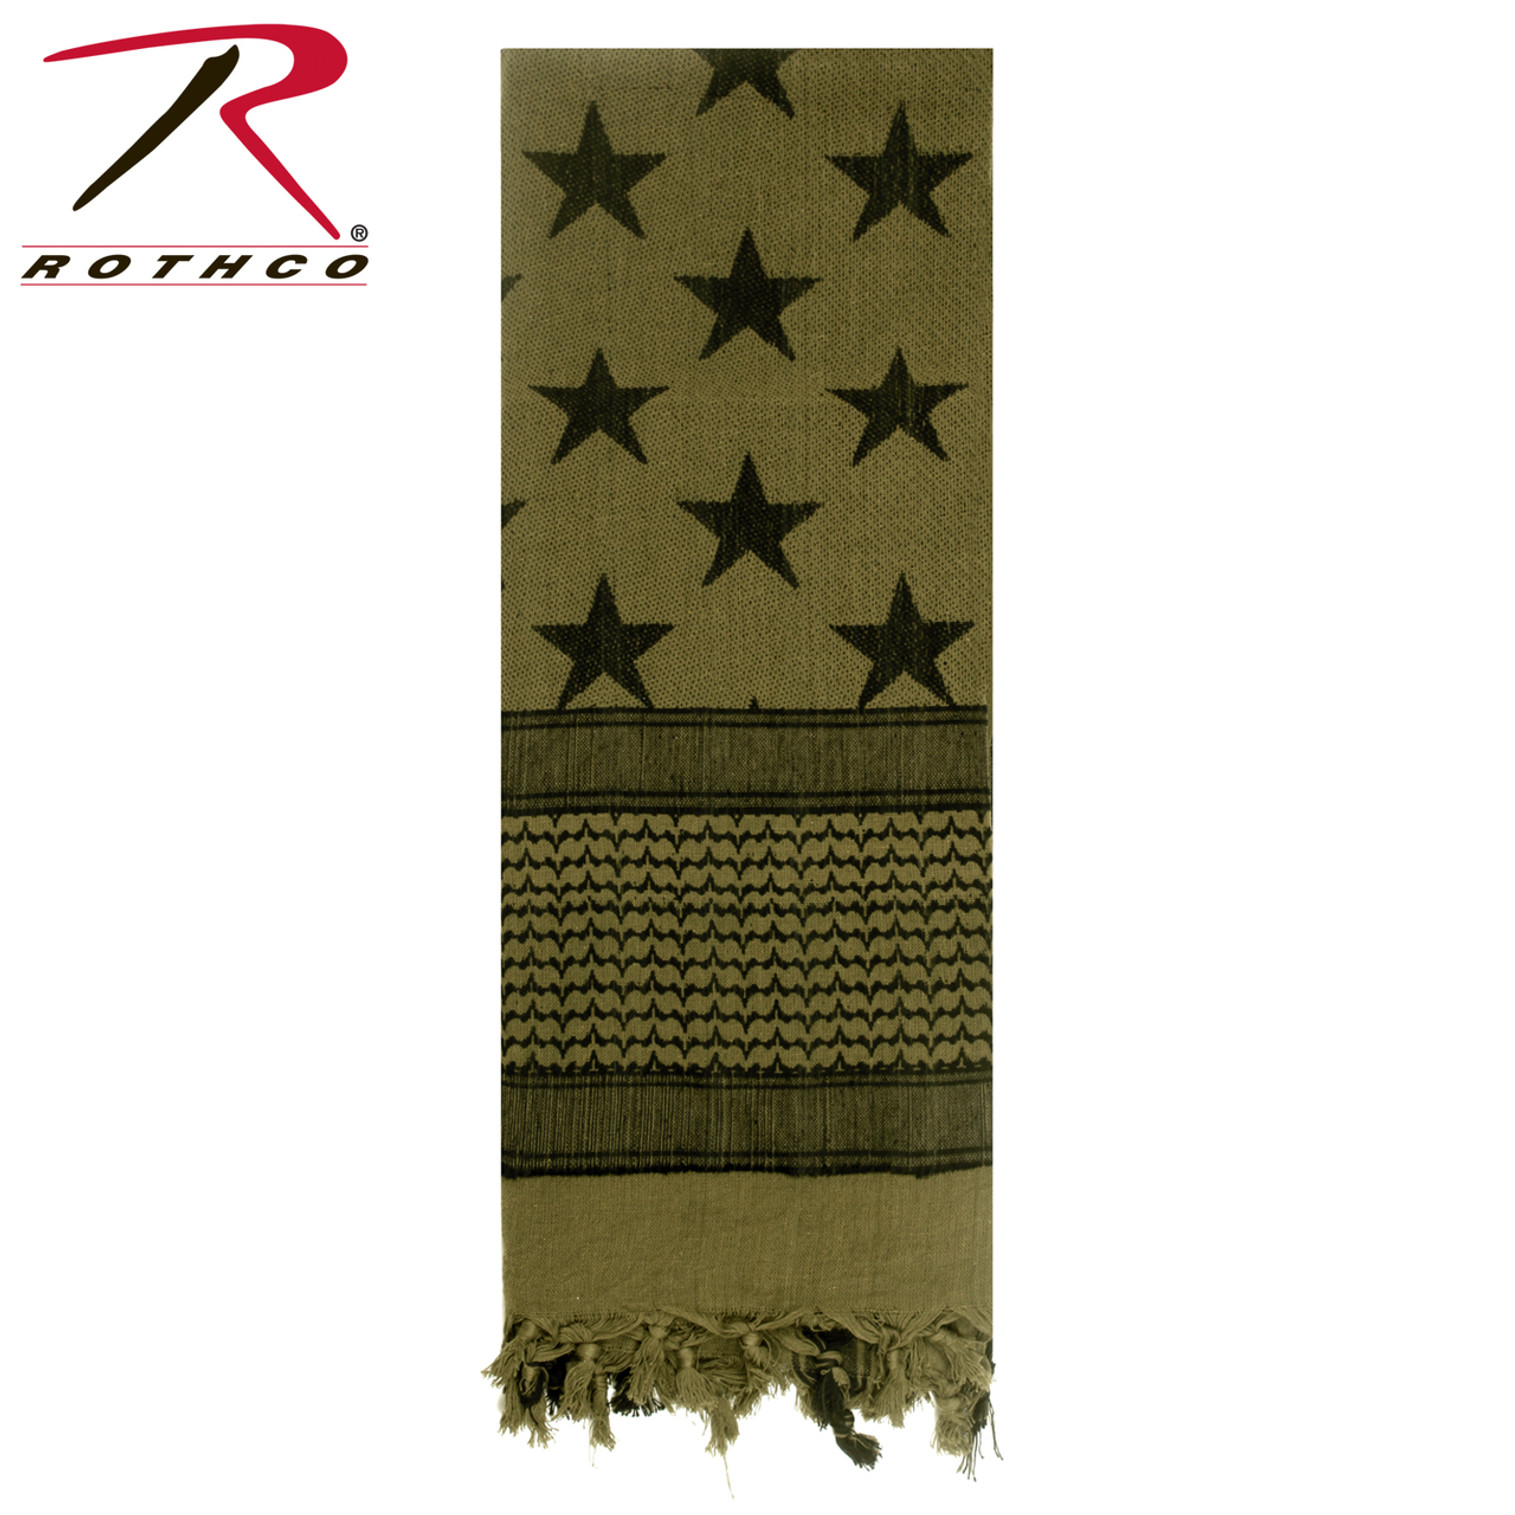 Rothco Stars and Stripes US Flag Shemagh Tactical Desert Keffiyeh Scarf - Olive Drab